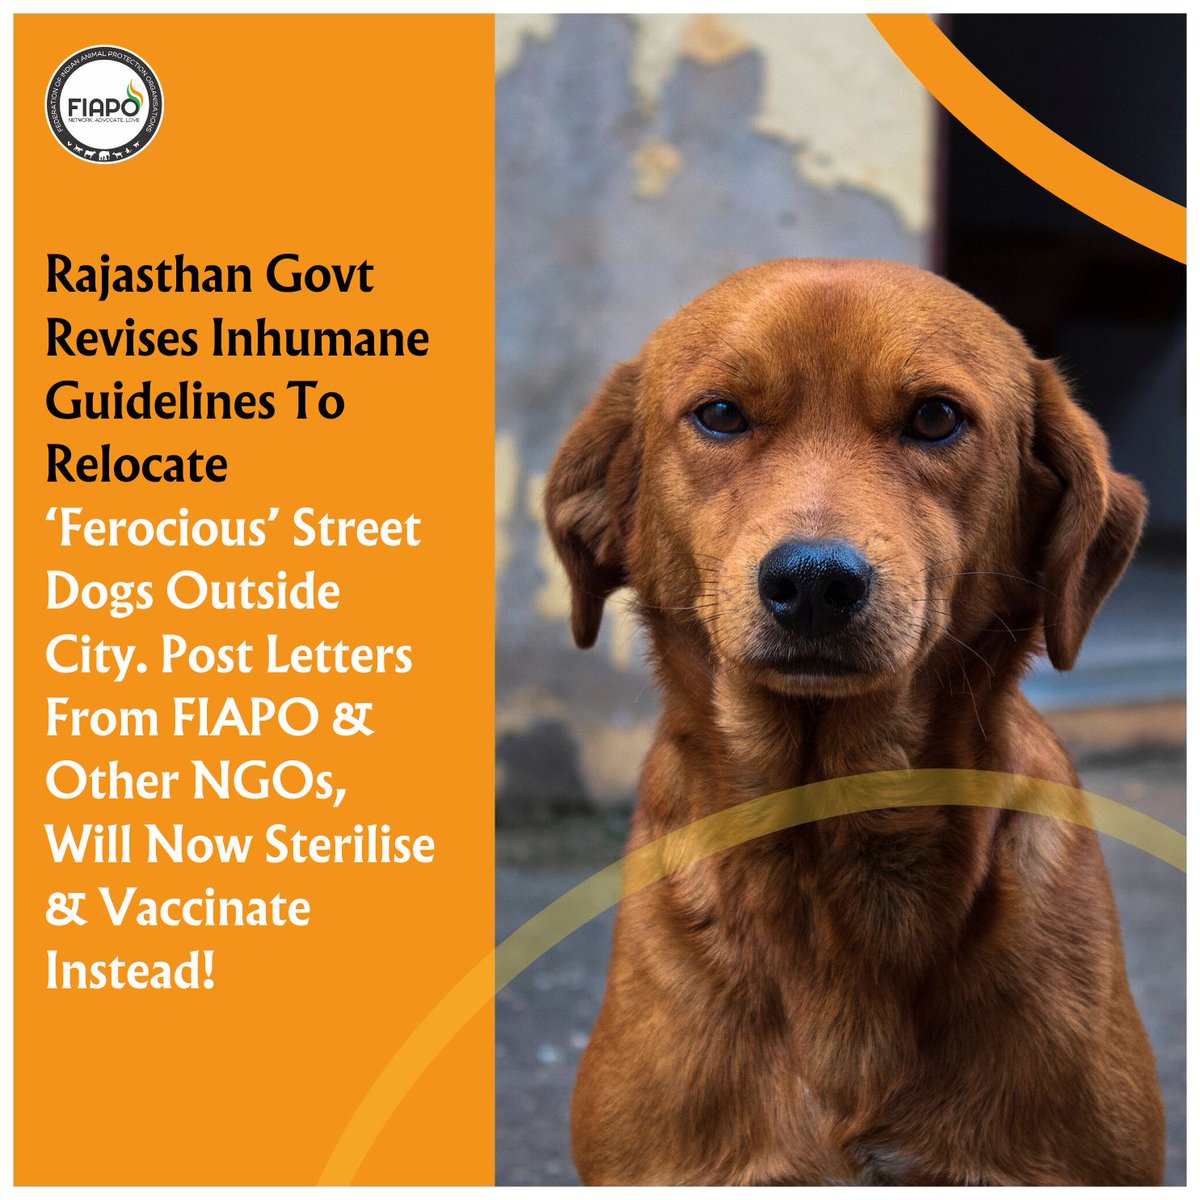 In a win for animal welfare NGOs, the Rajasthan govt revised its guidelines for “ferocious” street dogs. Instead of releasing them away from cities, they will be sterilised & vaccinated and then released in their familiar location.